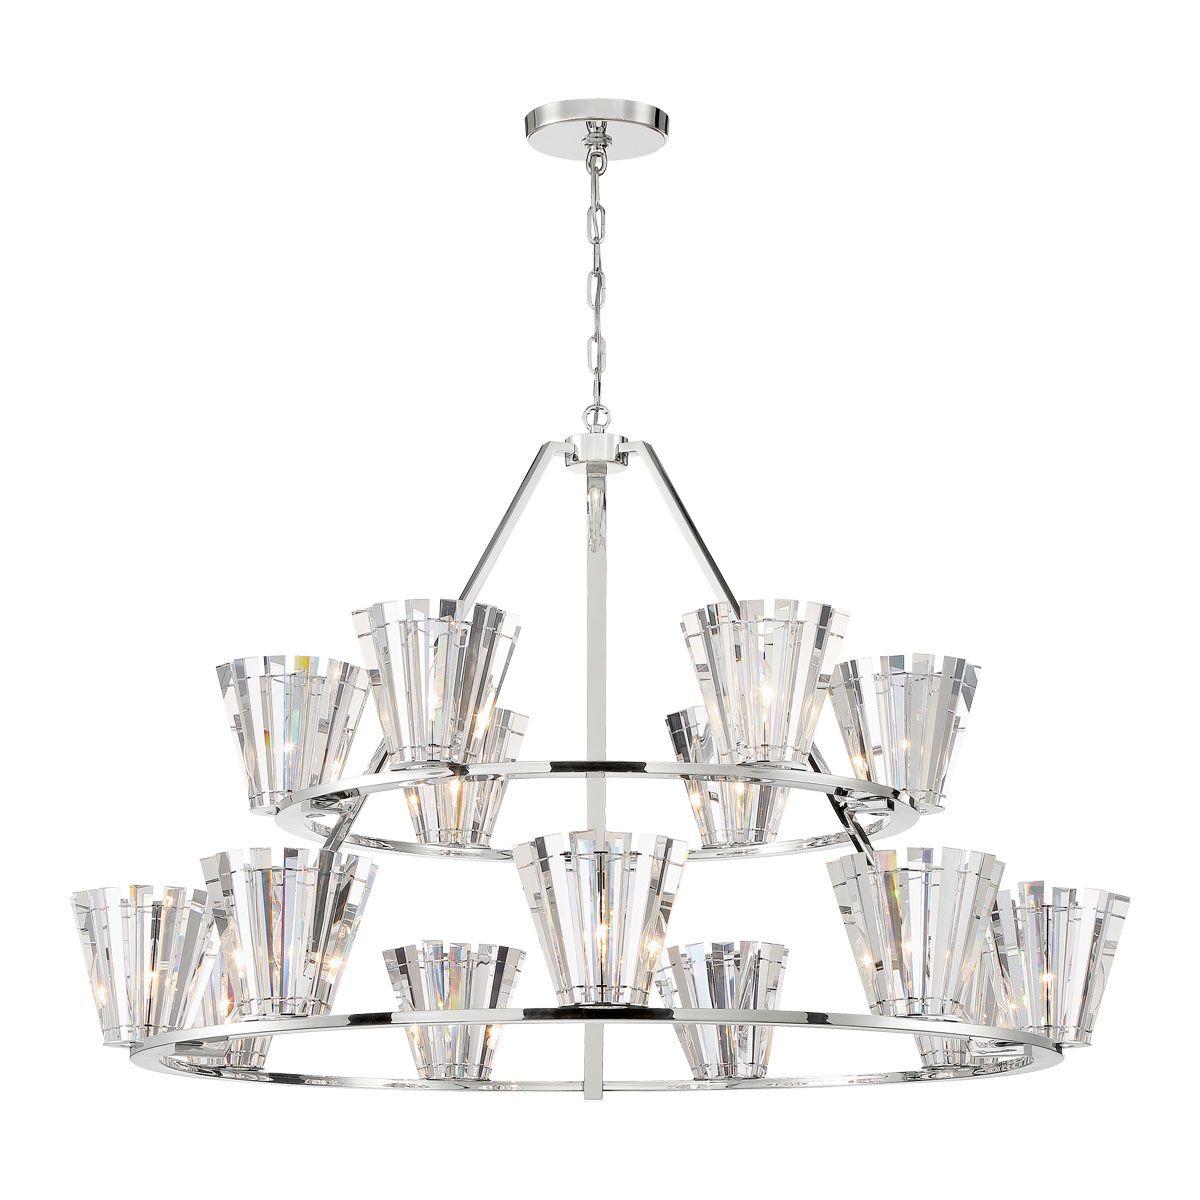 Ricca 51 in. 15 Lights Chandelier Silver finish